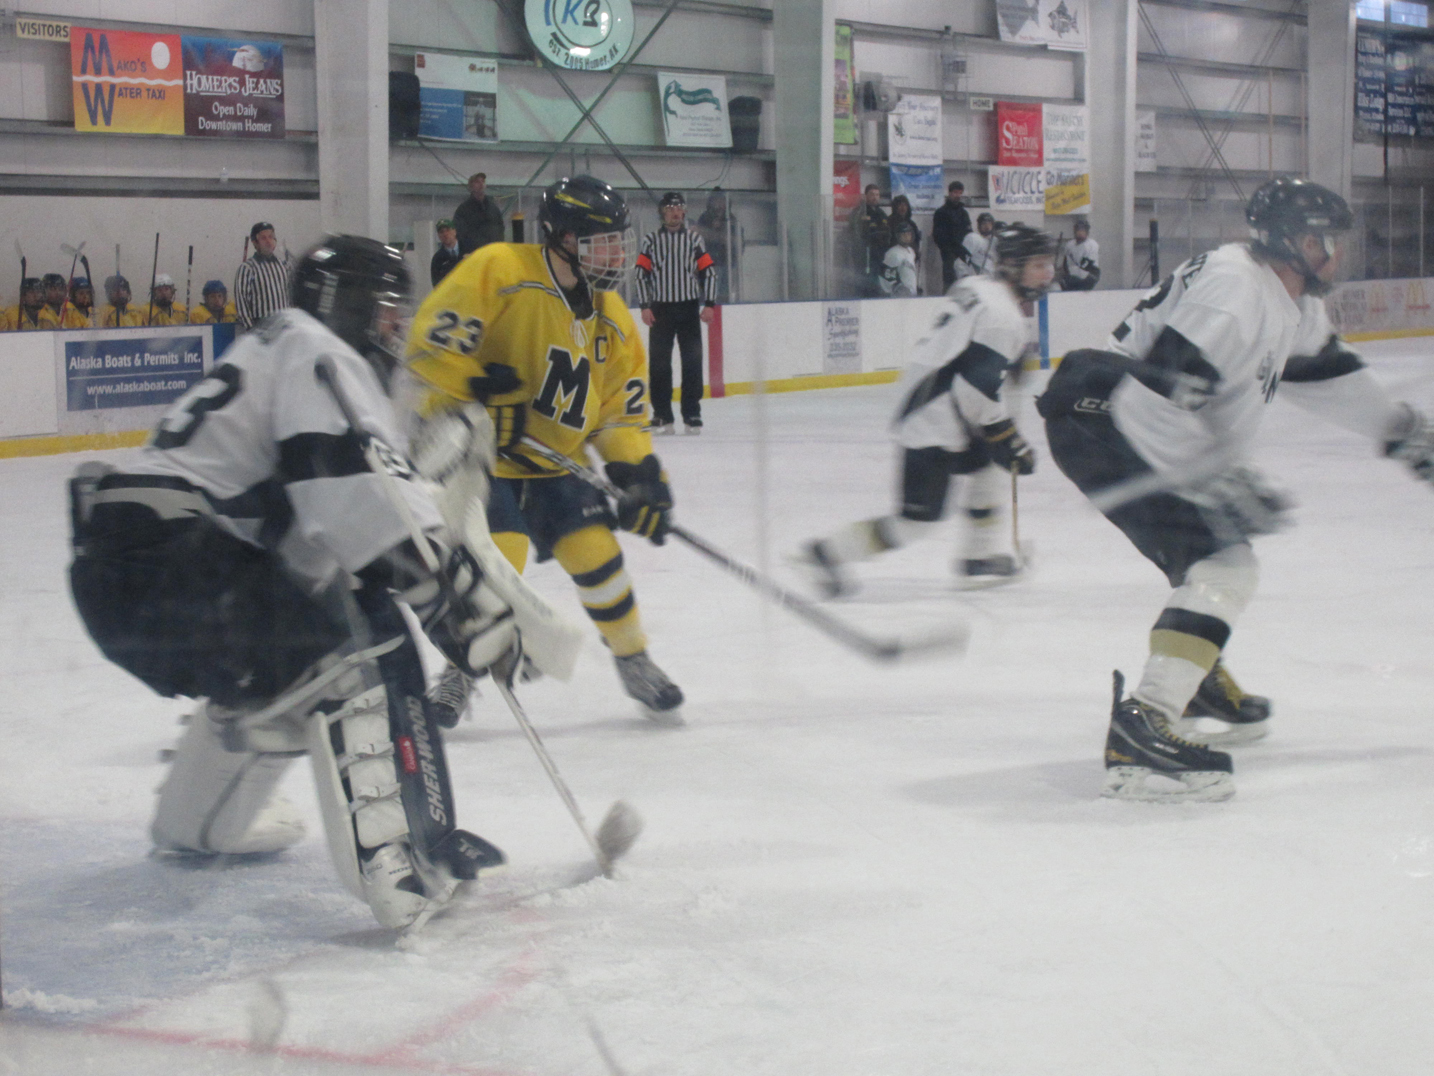 Mariner Carson Duggar prepares to score in the End of the Road Shootout game against Glennallen.-Photo by Wendy Wayne